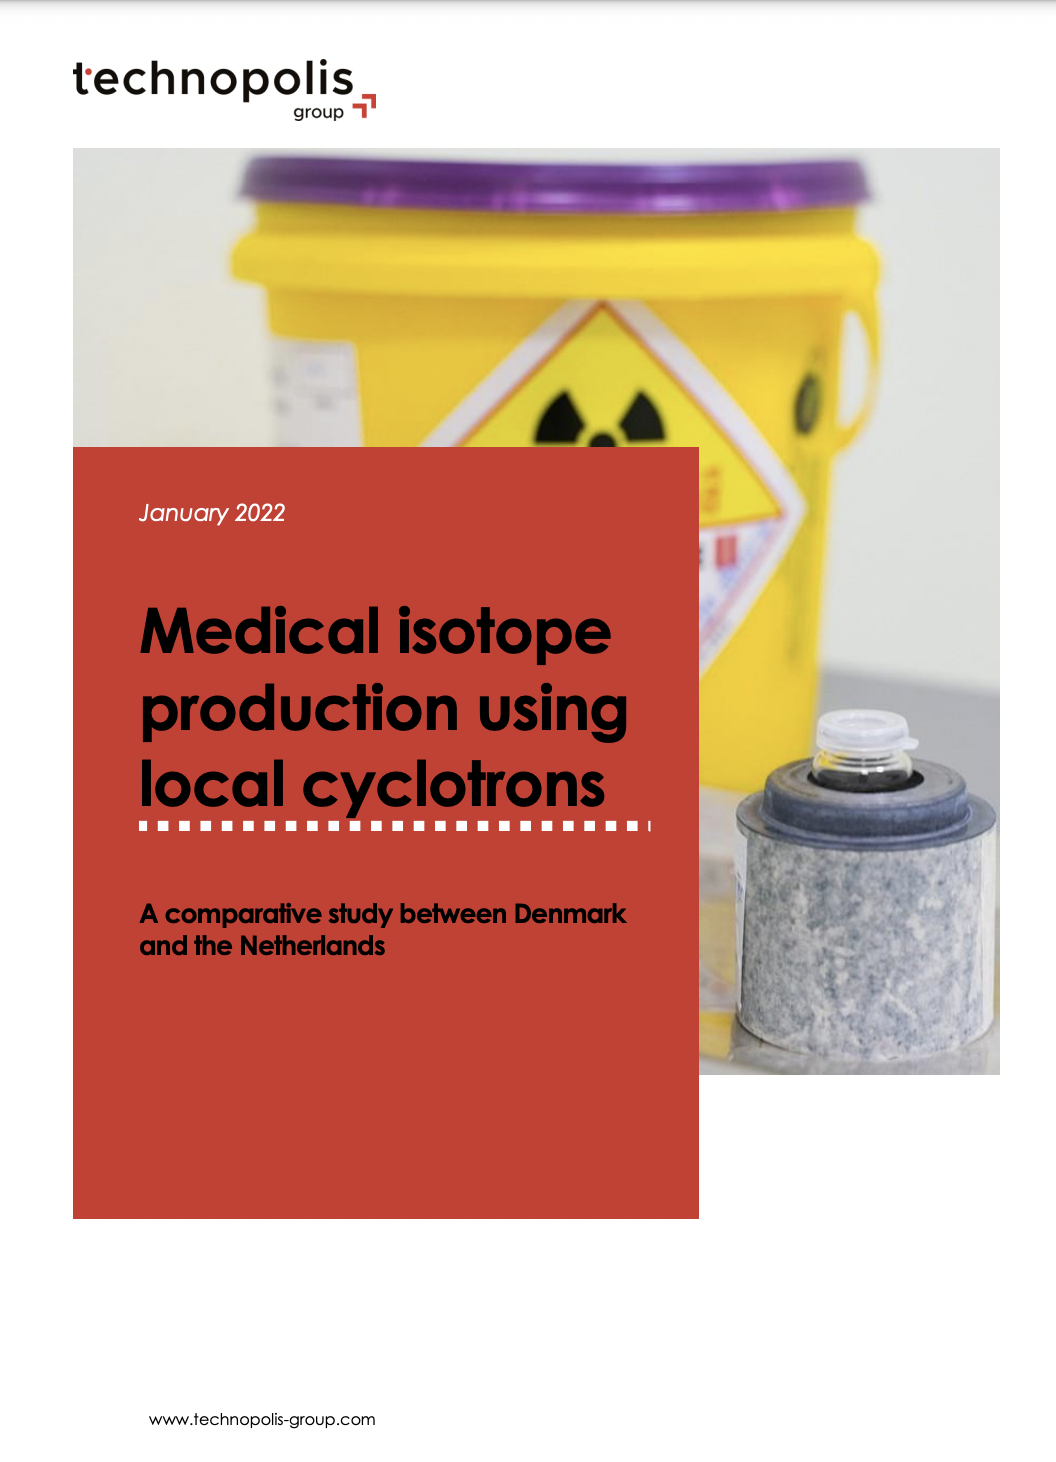 Medical isotope production using local cyclotrons: a comparative study between Denmark and the Netherlands 